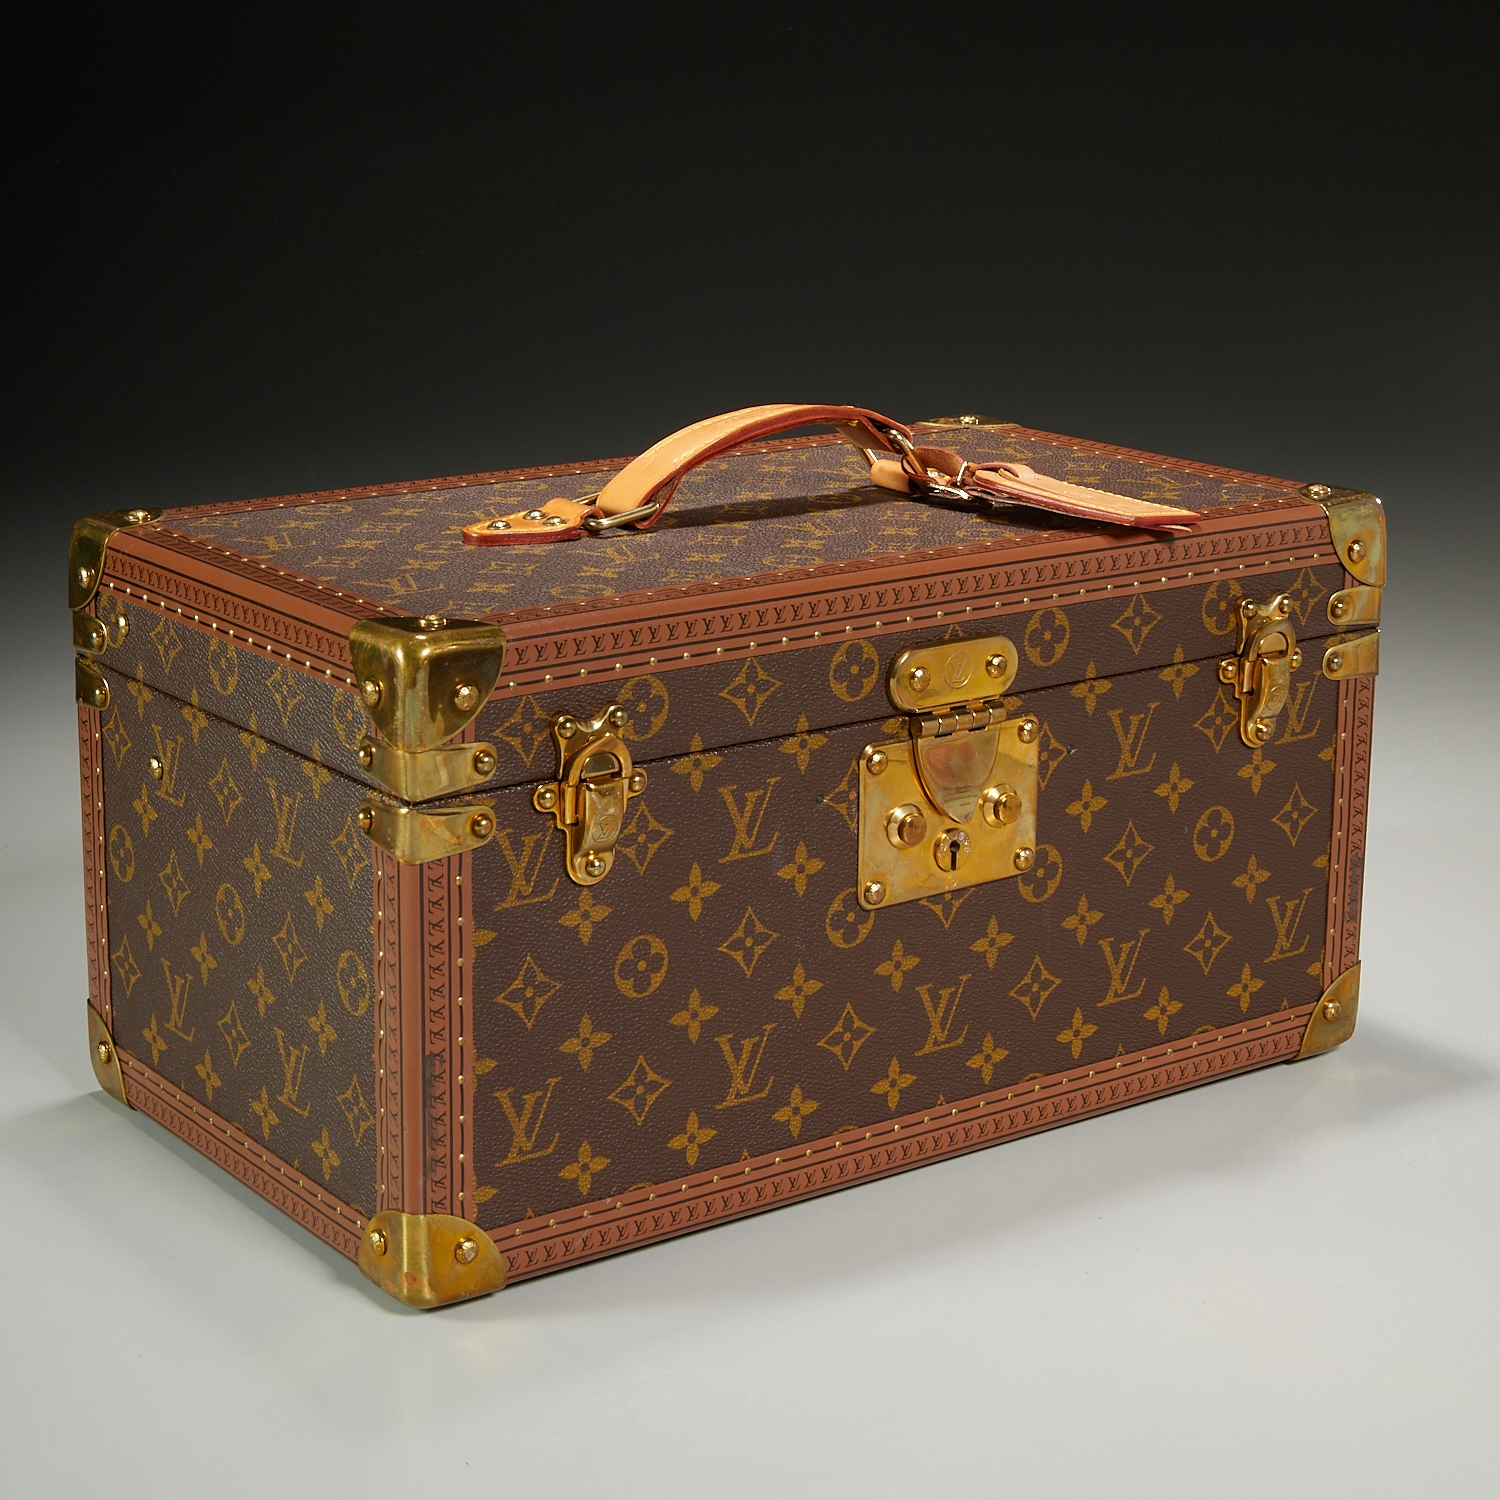 Sold at Auction: A Louis Vuitton travel trunk. 22 x 22 x 45 in